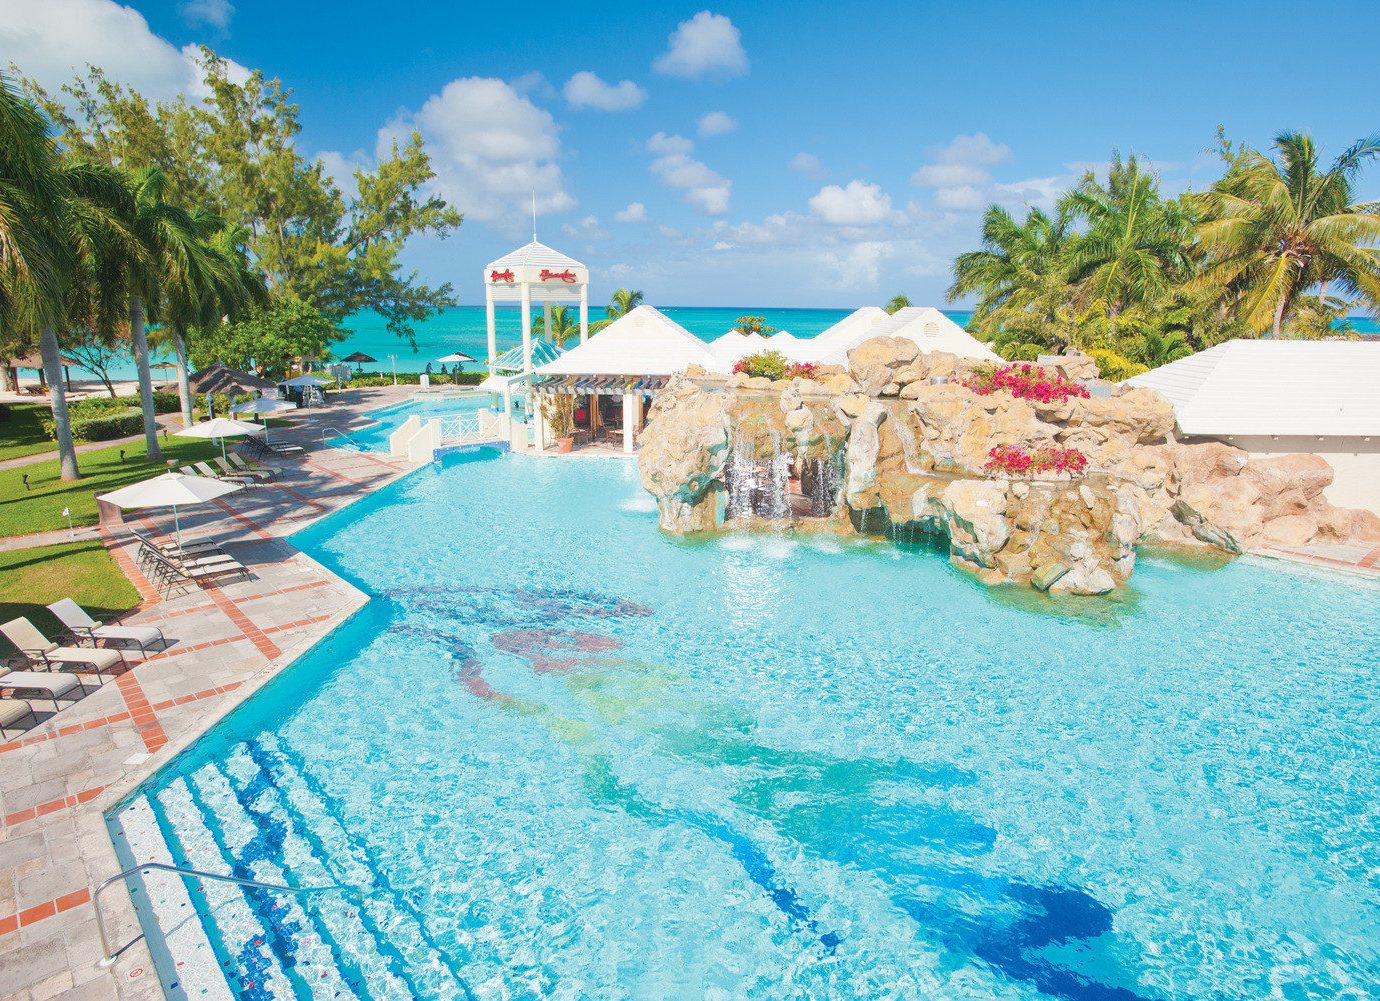 All-Inclusive Resorts Family Travel Hotels Resort leisure swimming pool caribbean vacation resort town tourism tropics water Lagoon palm tree coastal and oceanic landforms Water park bay Sea arecales sky recreation cay